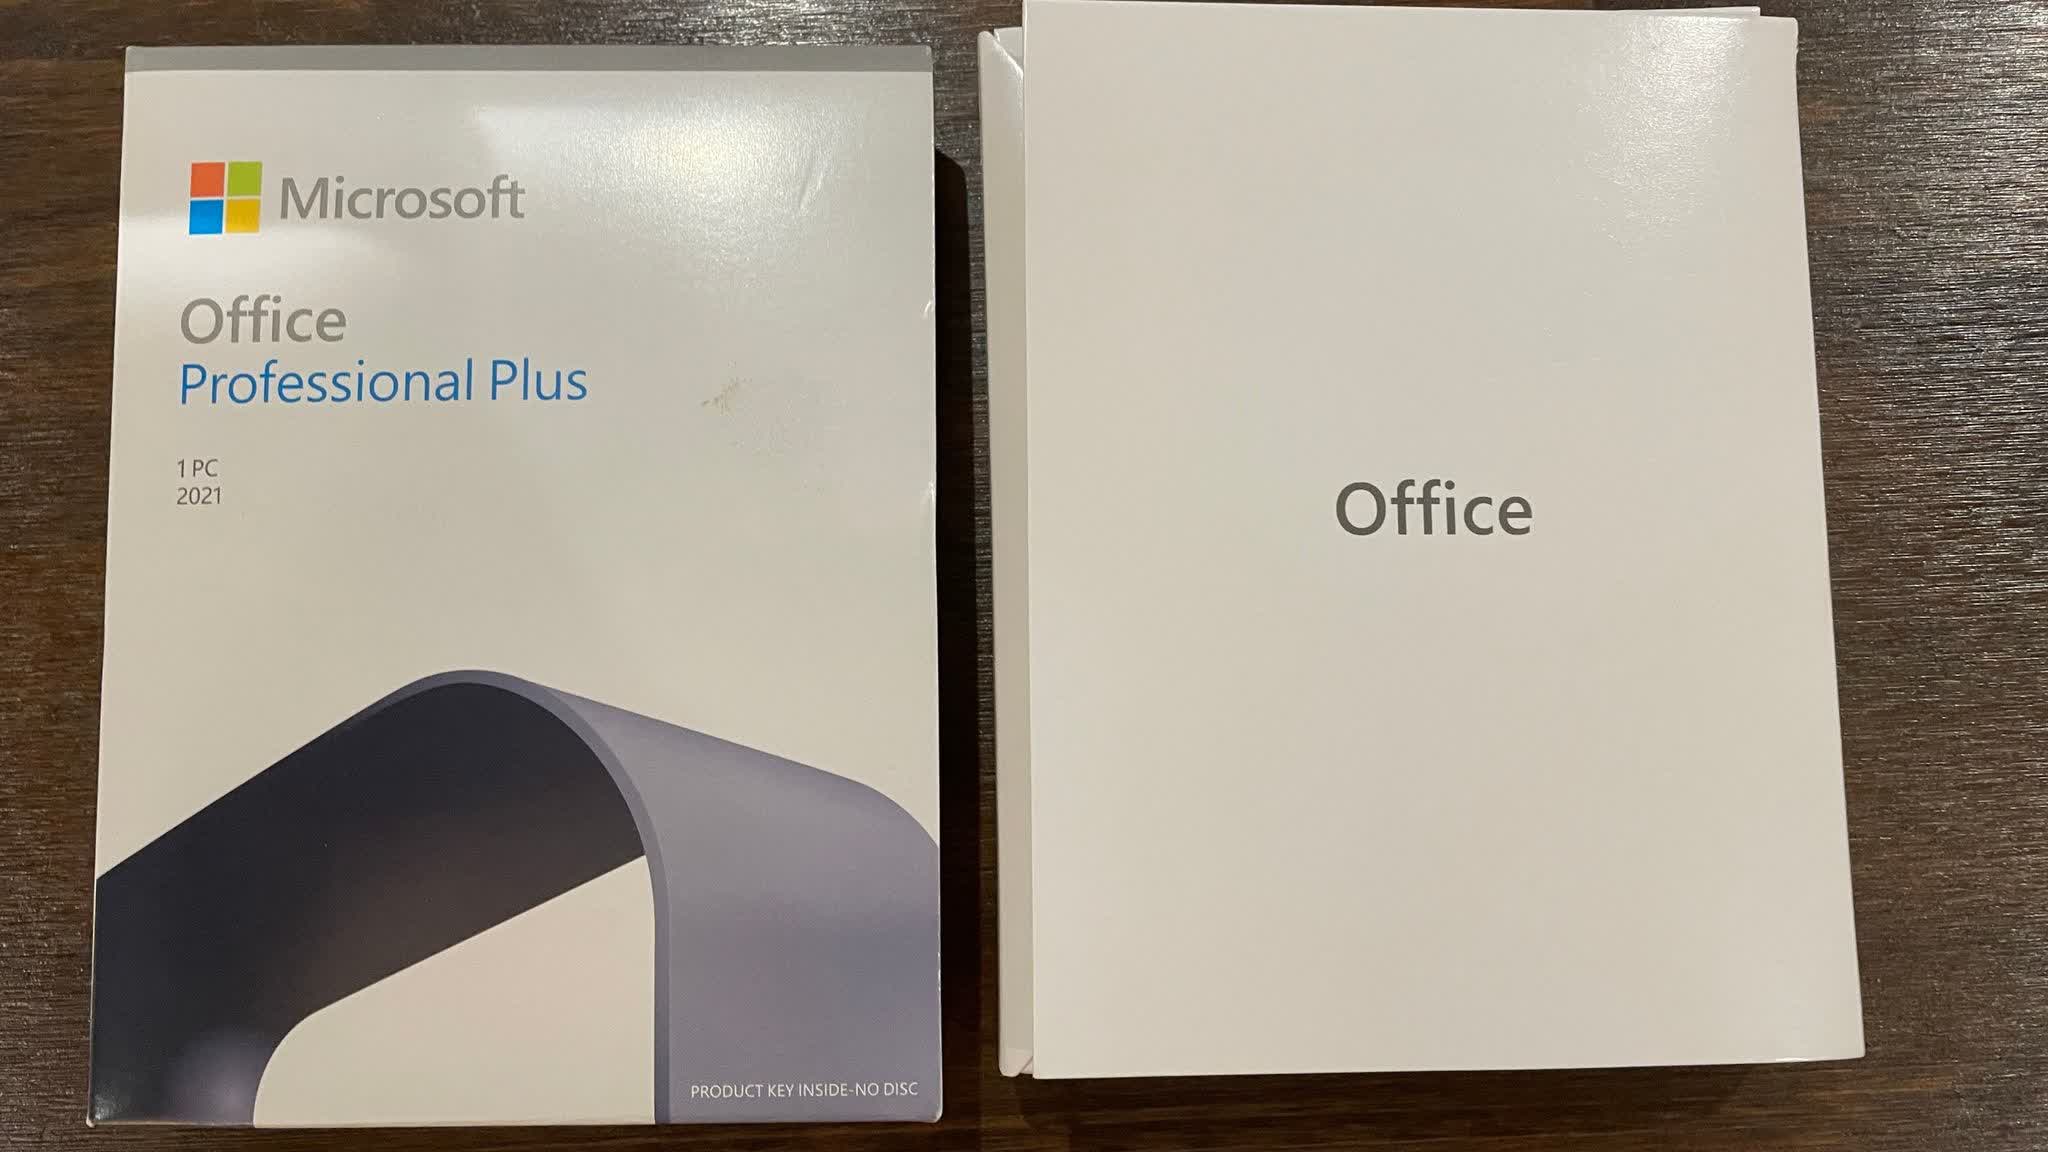 Criminals are hijacking PCs by mailing out fake Microsoft Office USB sticks